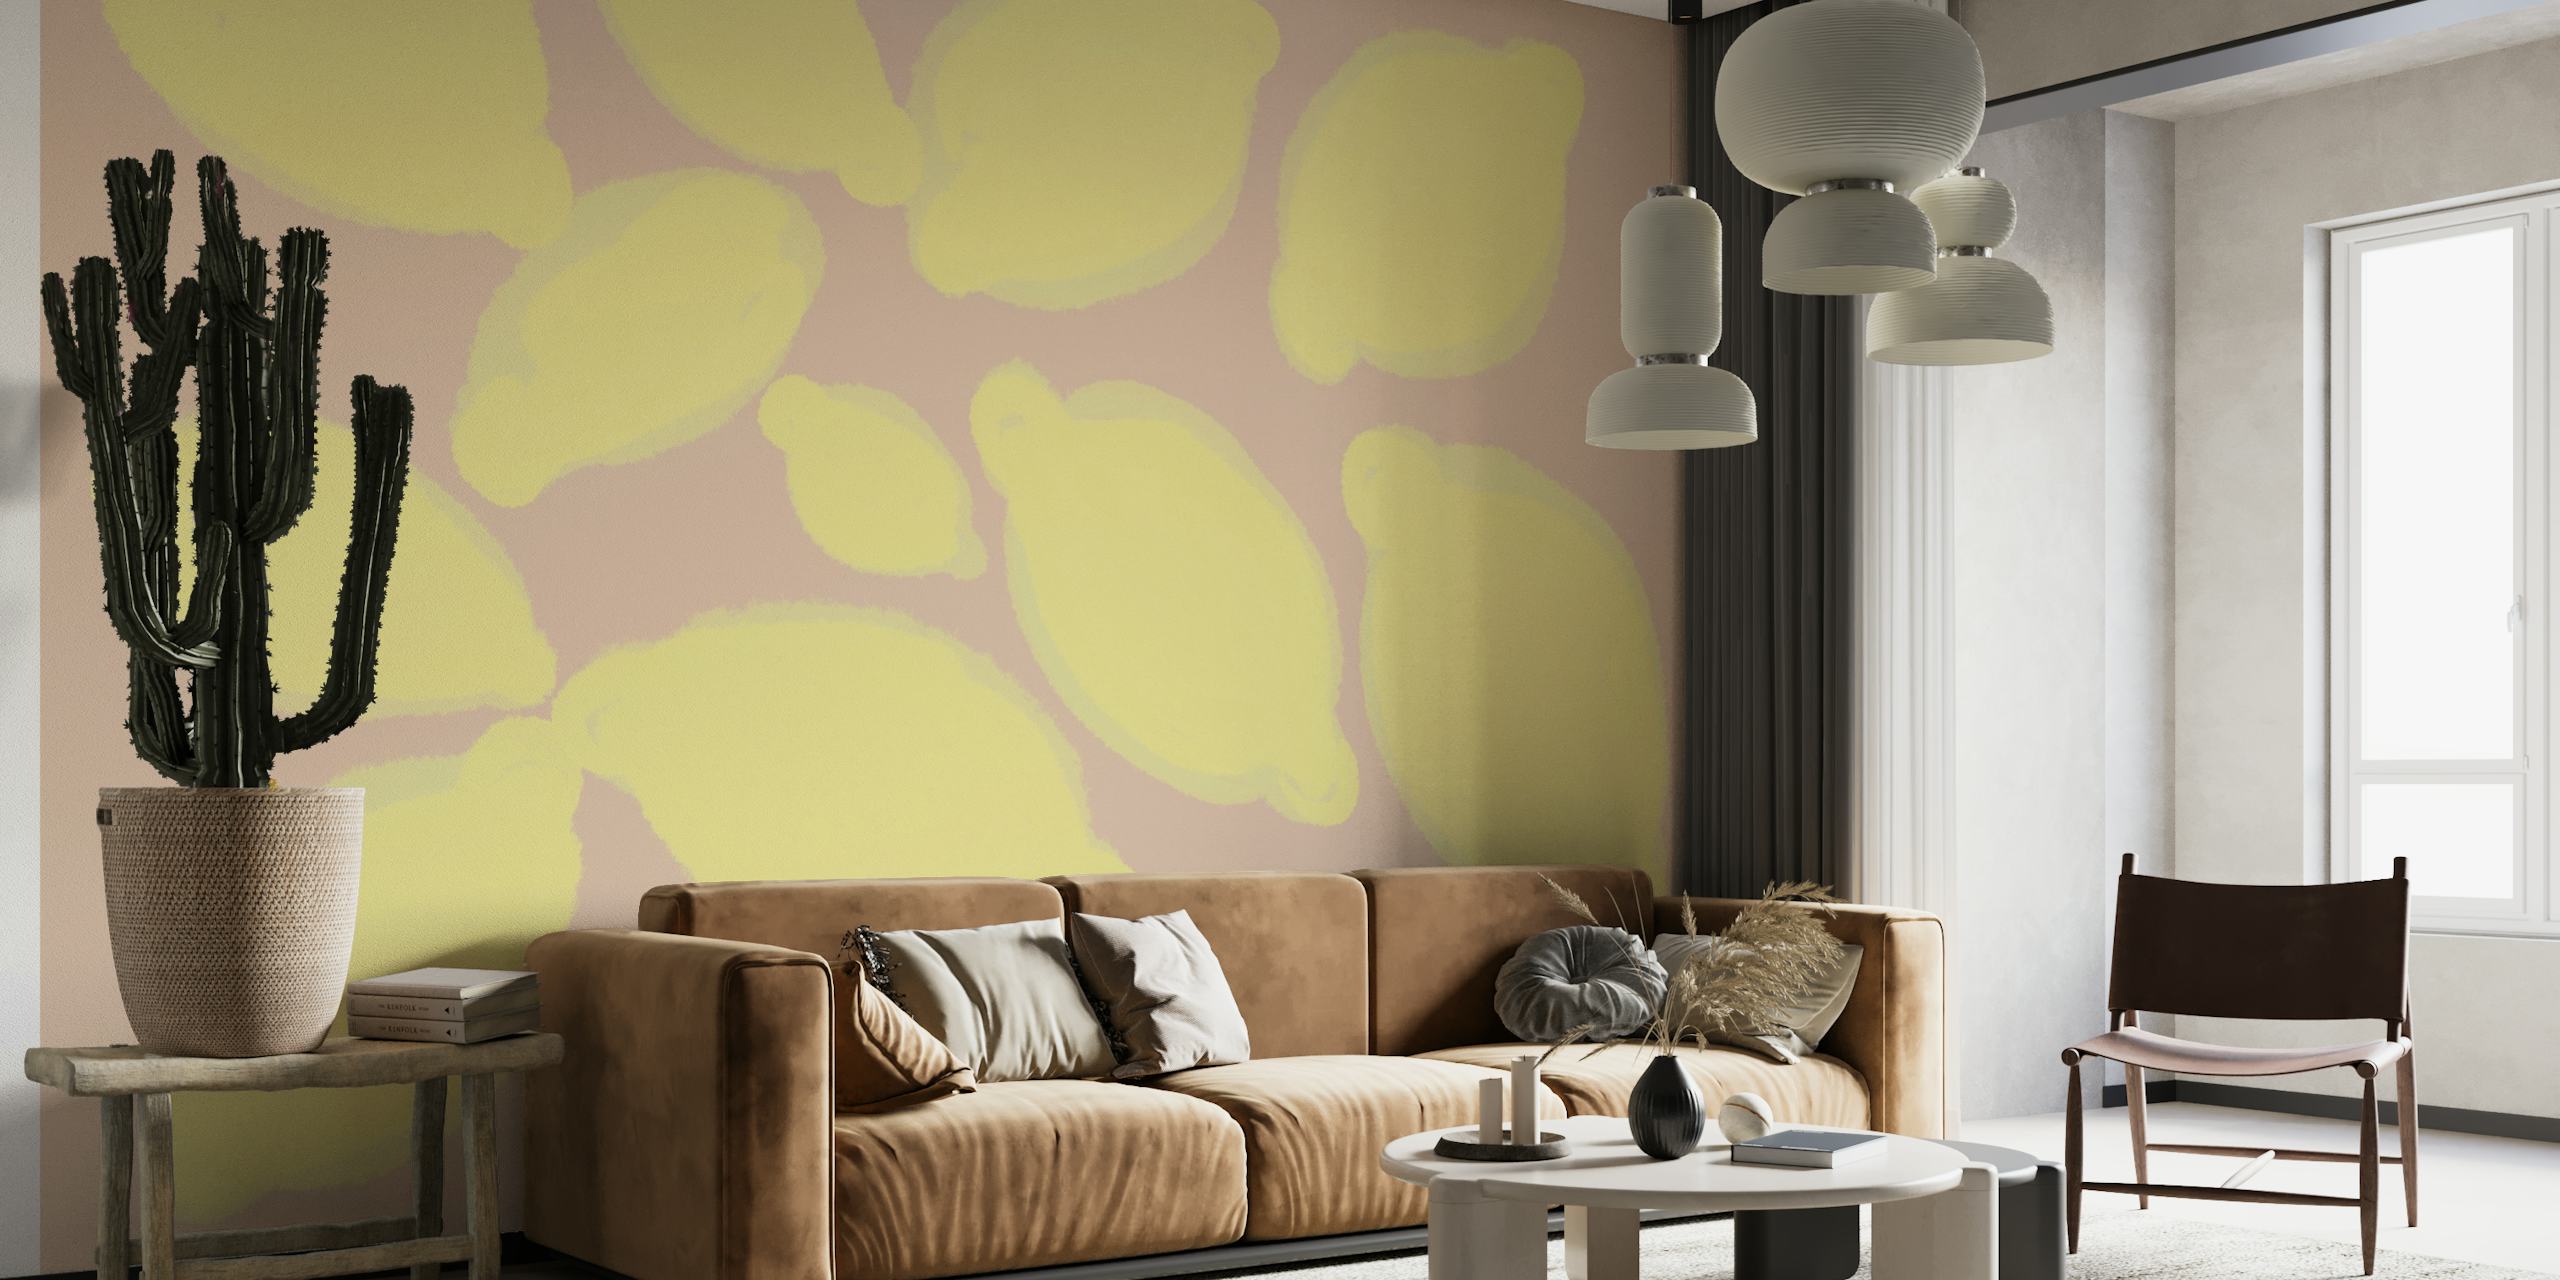 Illustrated lemons pattern on a warm background wall mural